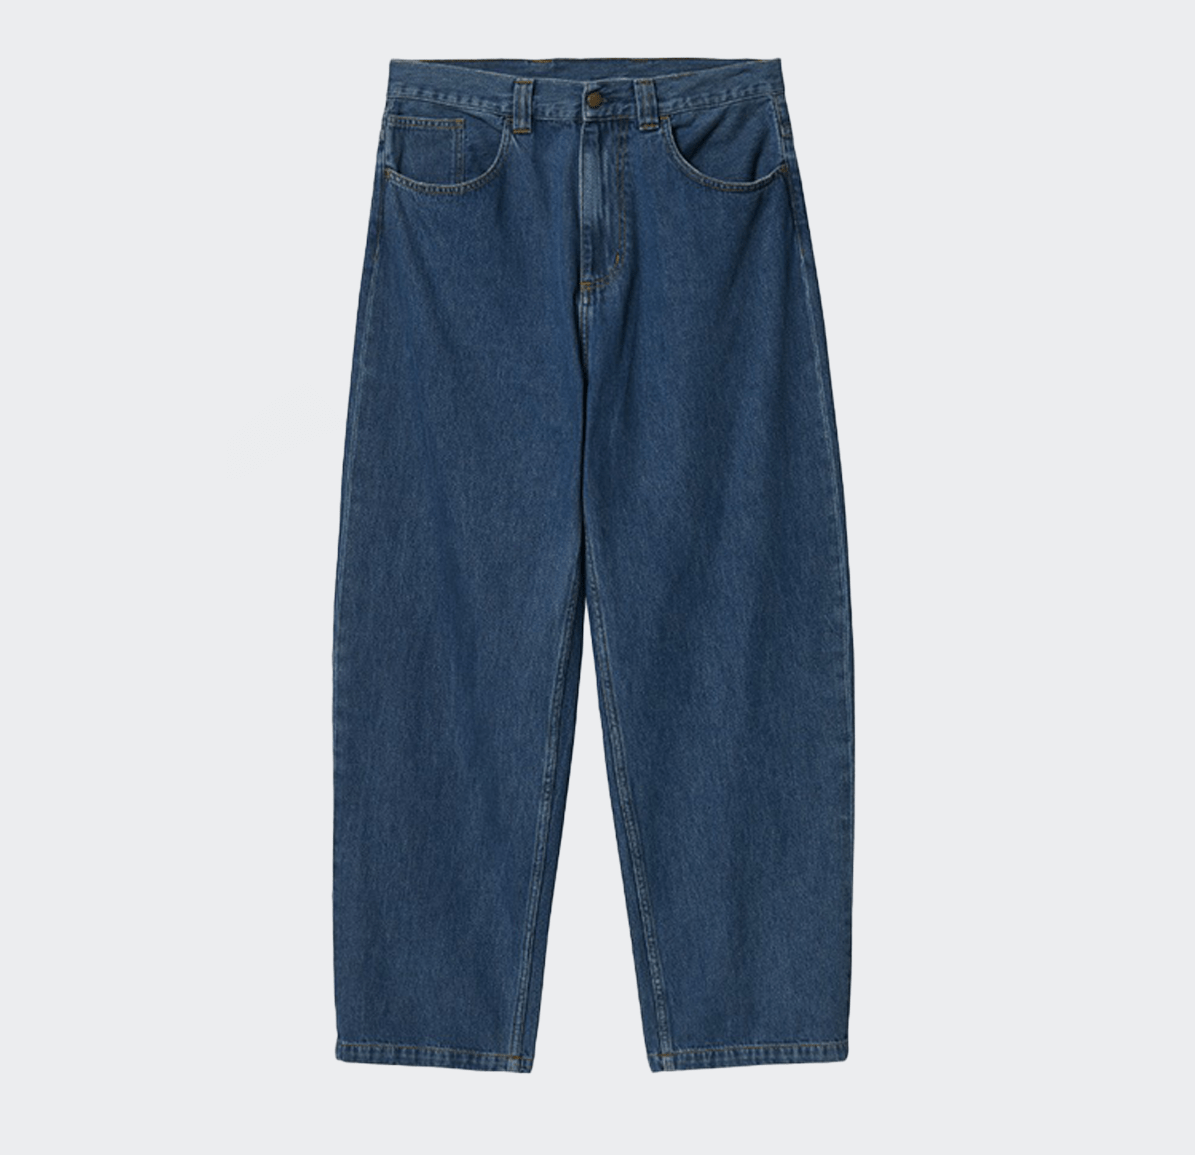 Carhartt WIP Brandon Womens Pant - Blue Stone Washed - Carhartt WIP - State Of Play